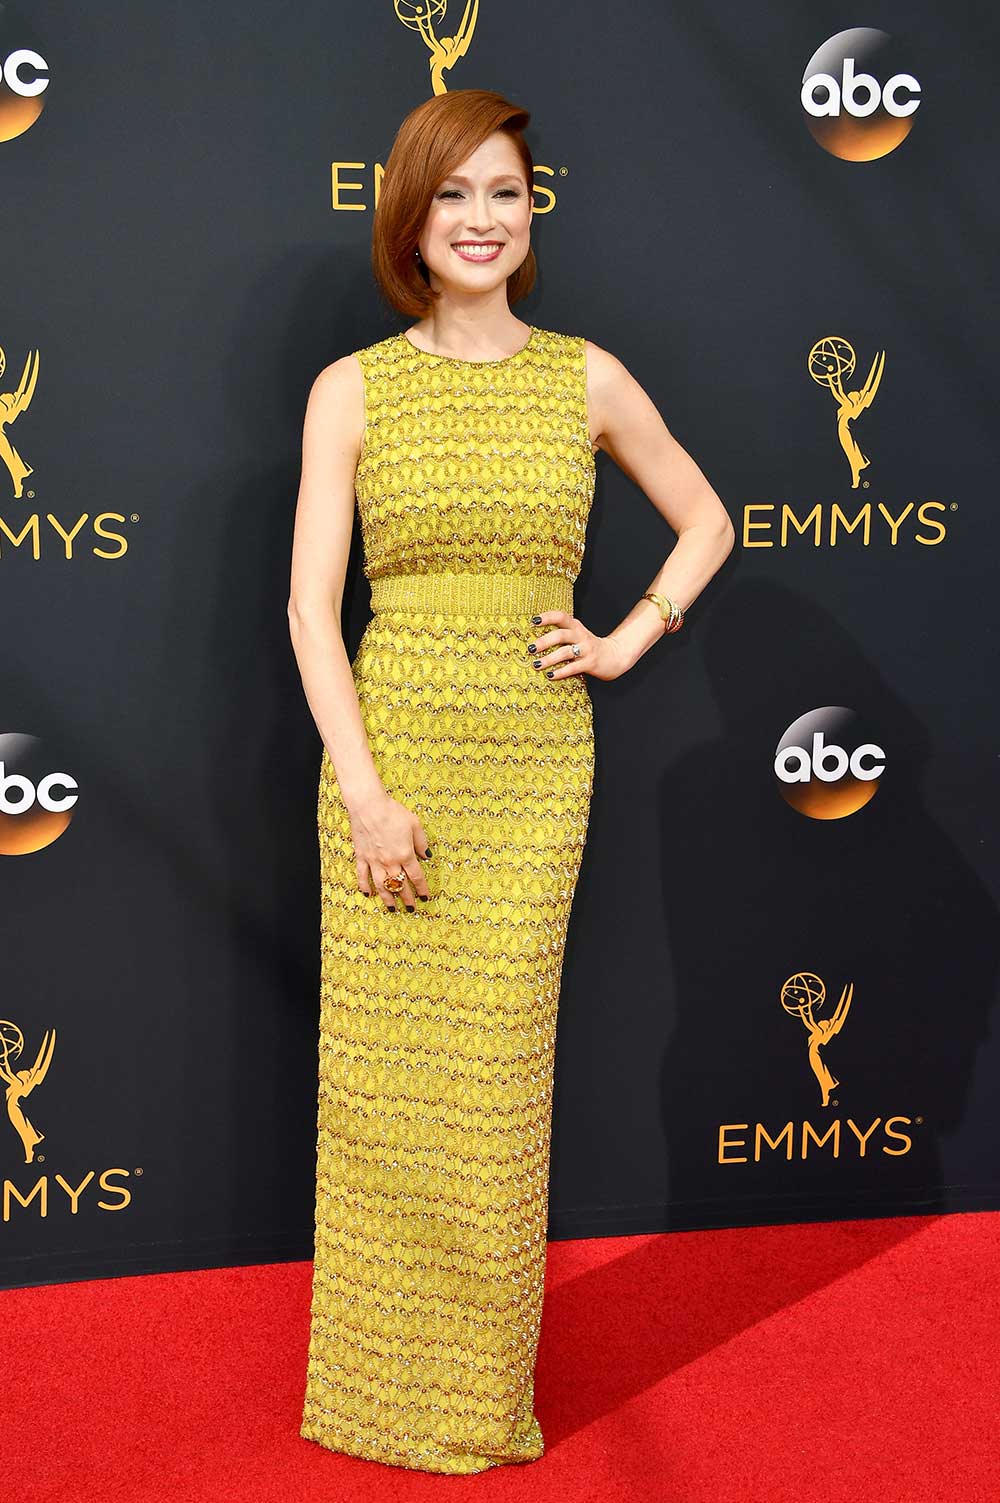 Ellie-Kemper-attends-the-68th-Annual-Primetime-Emmy-Awards-at-Microsoft-Theater-on-September-18-2016